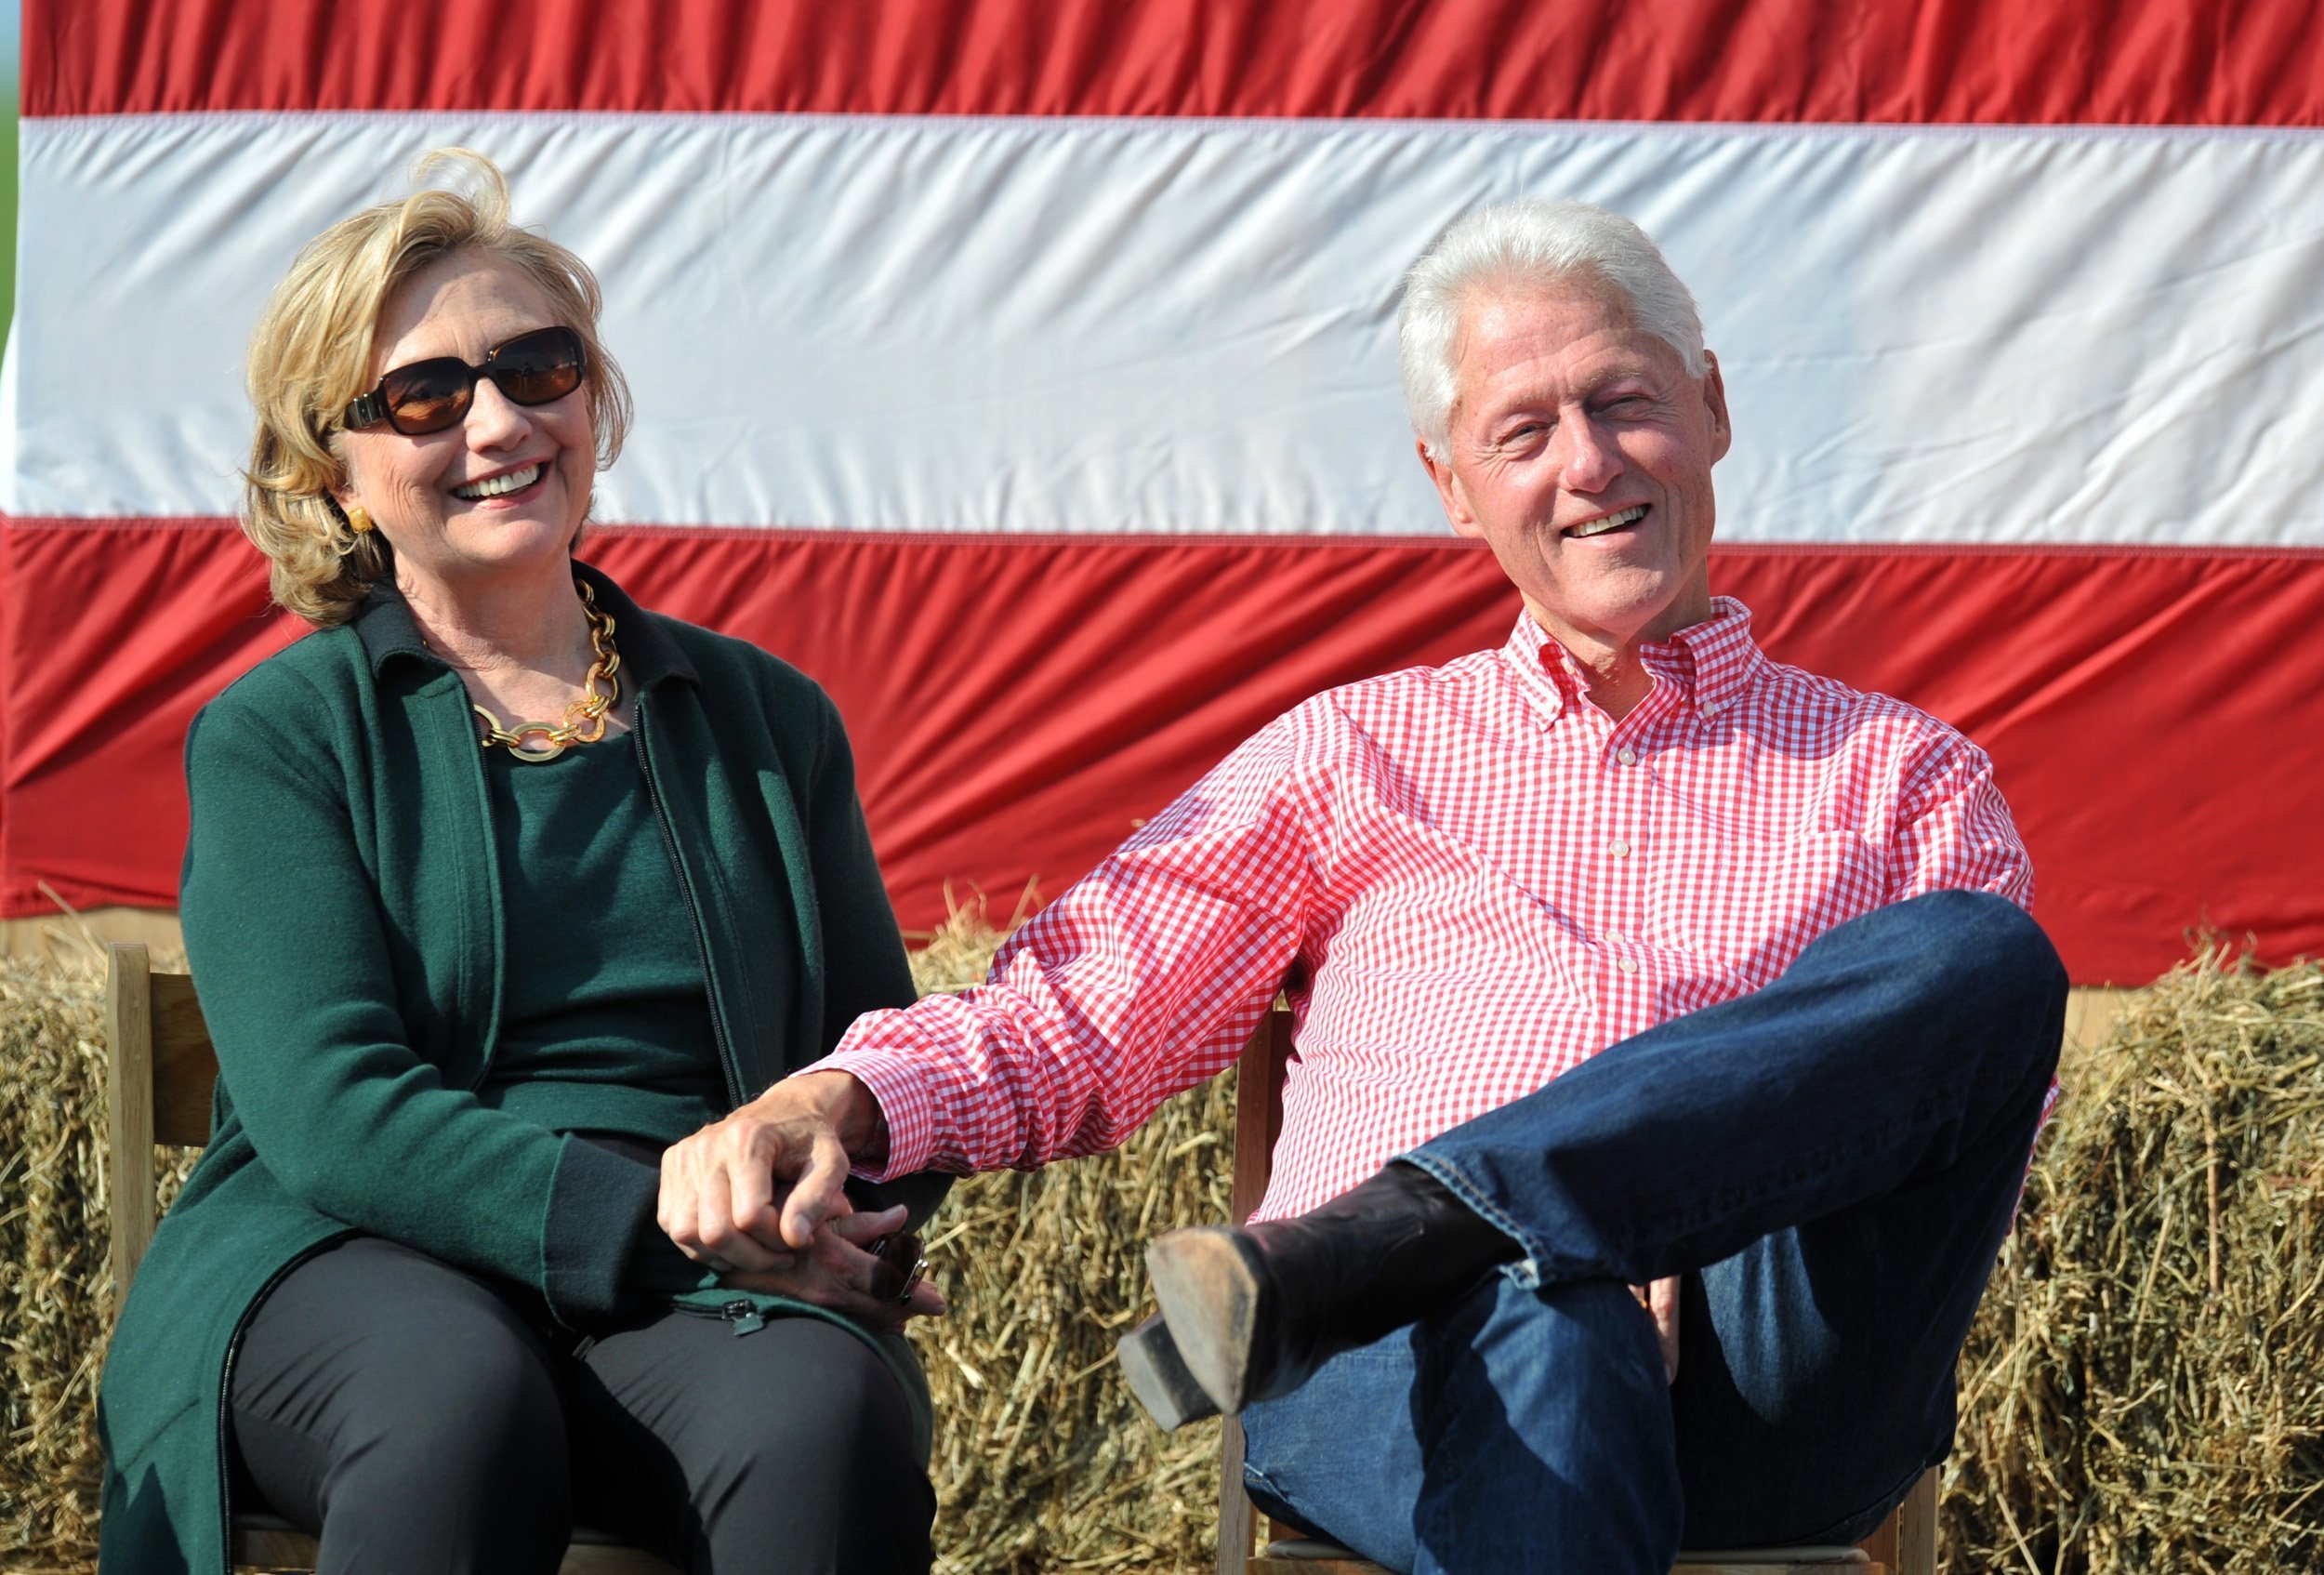 Bill and Hillary Clinton at the 37th Harkin Steak Fry in Indianola, Iowa | Photo: Getty Images